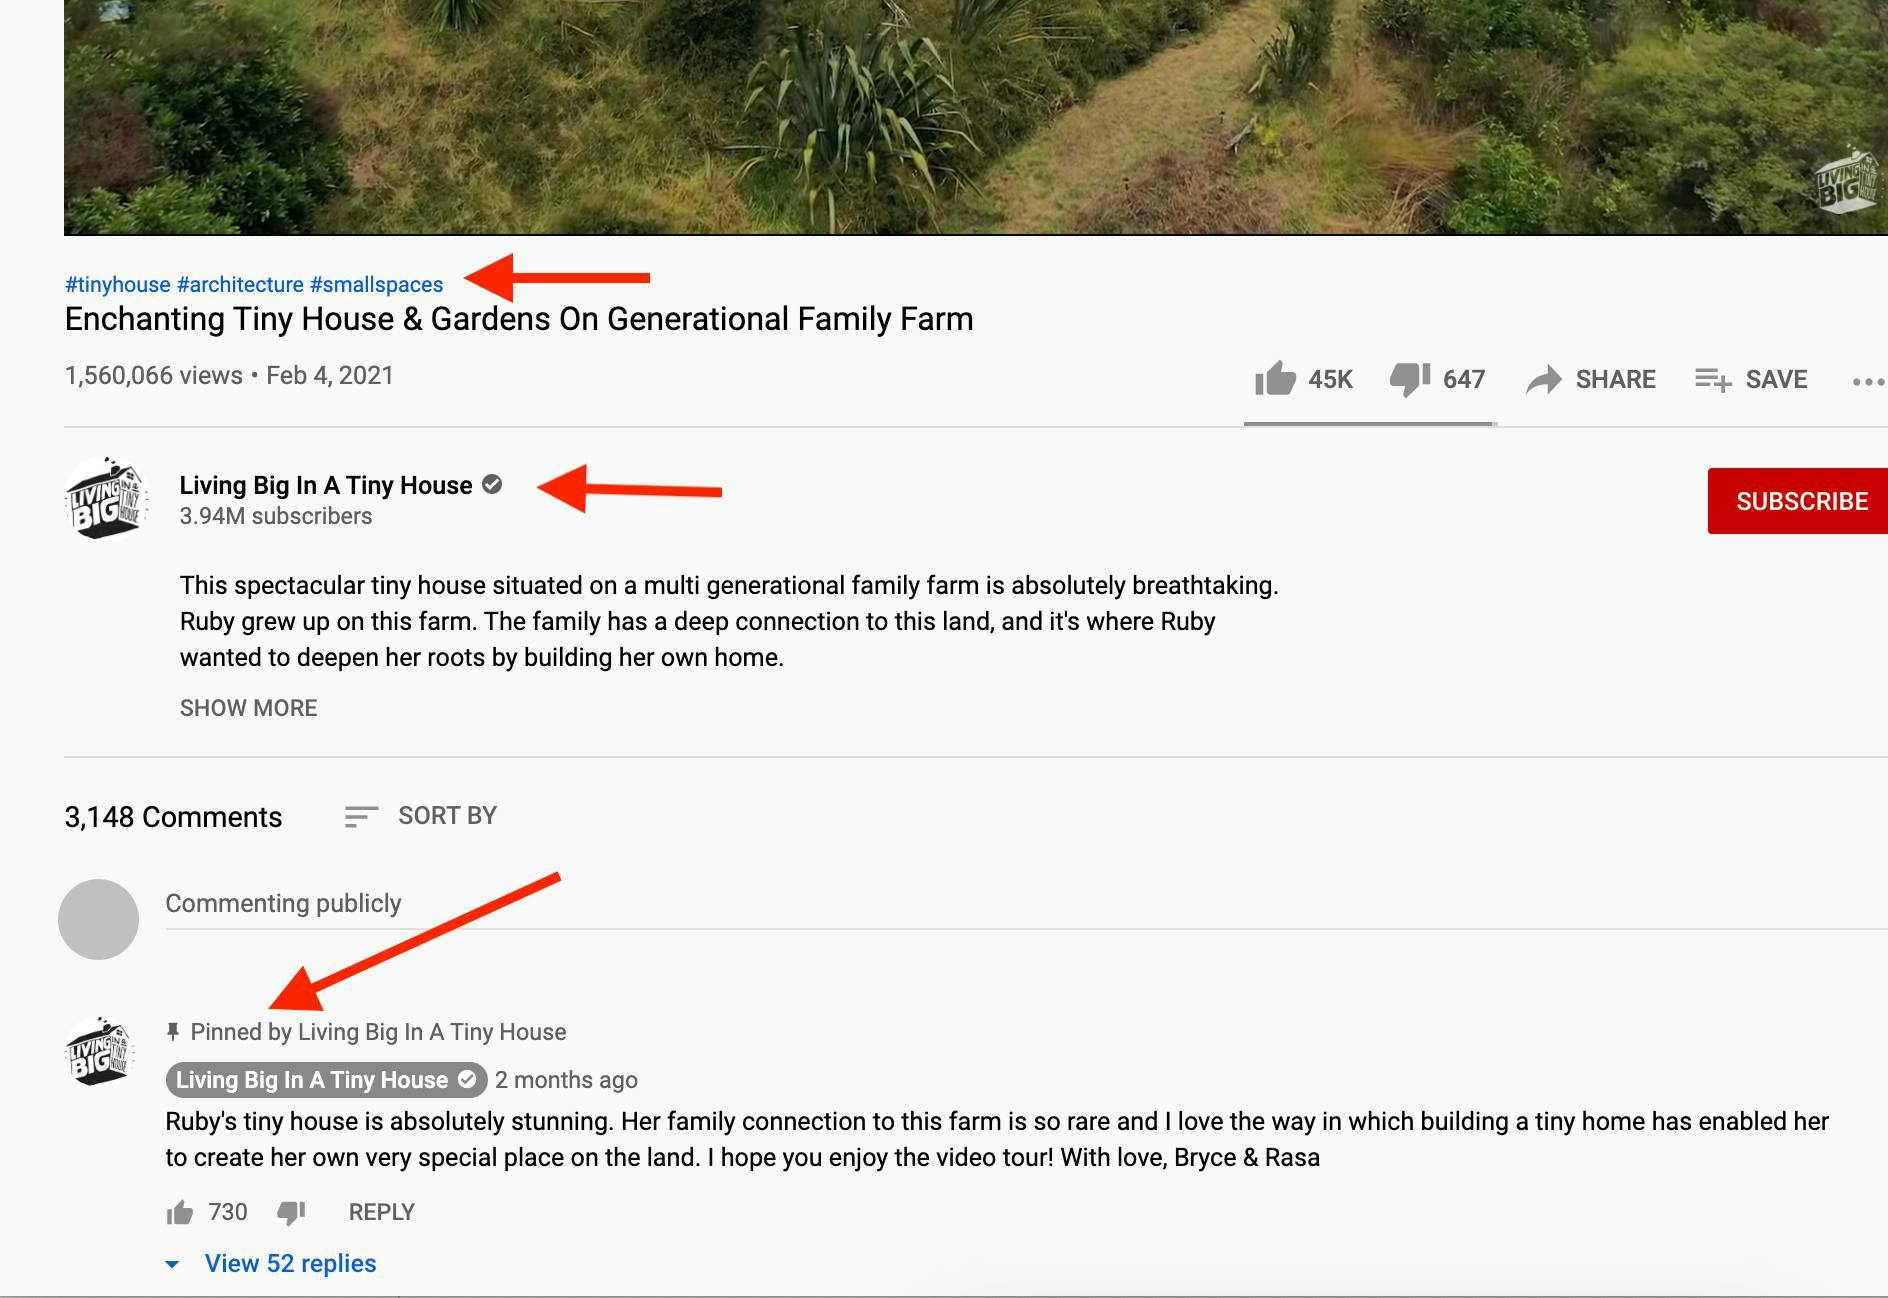 Example of a well optimized YouTube video title, description, and pinned comment